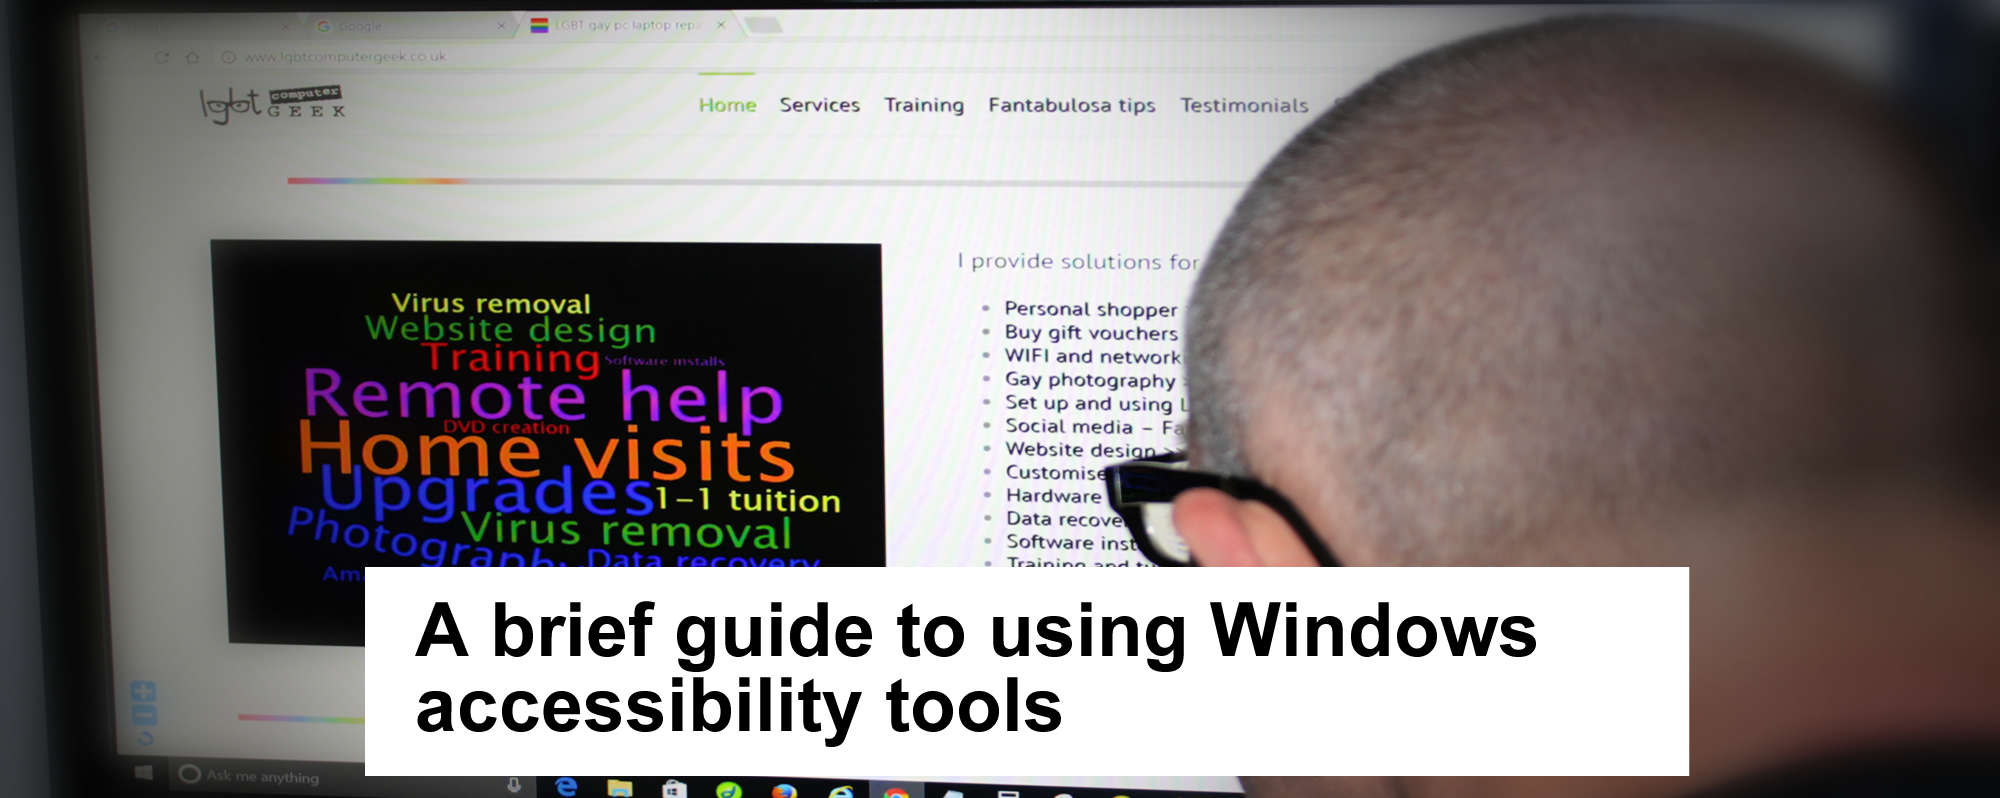 A brief guide to Windows 10 accessibility tools